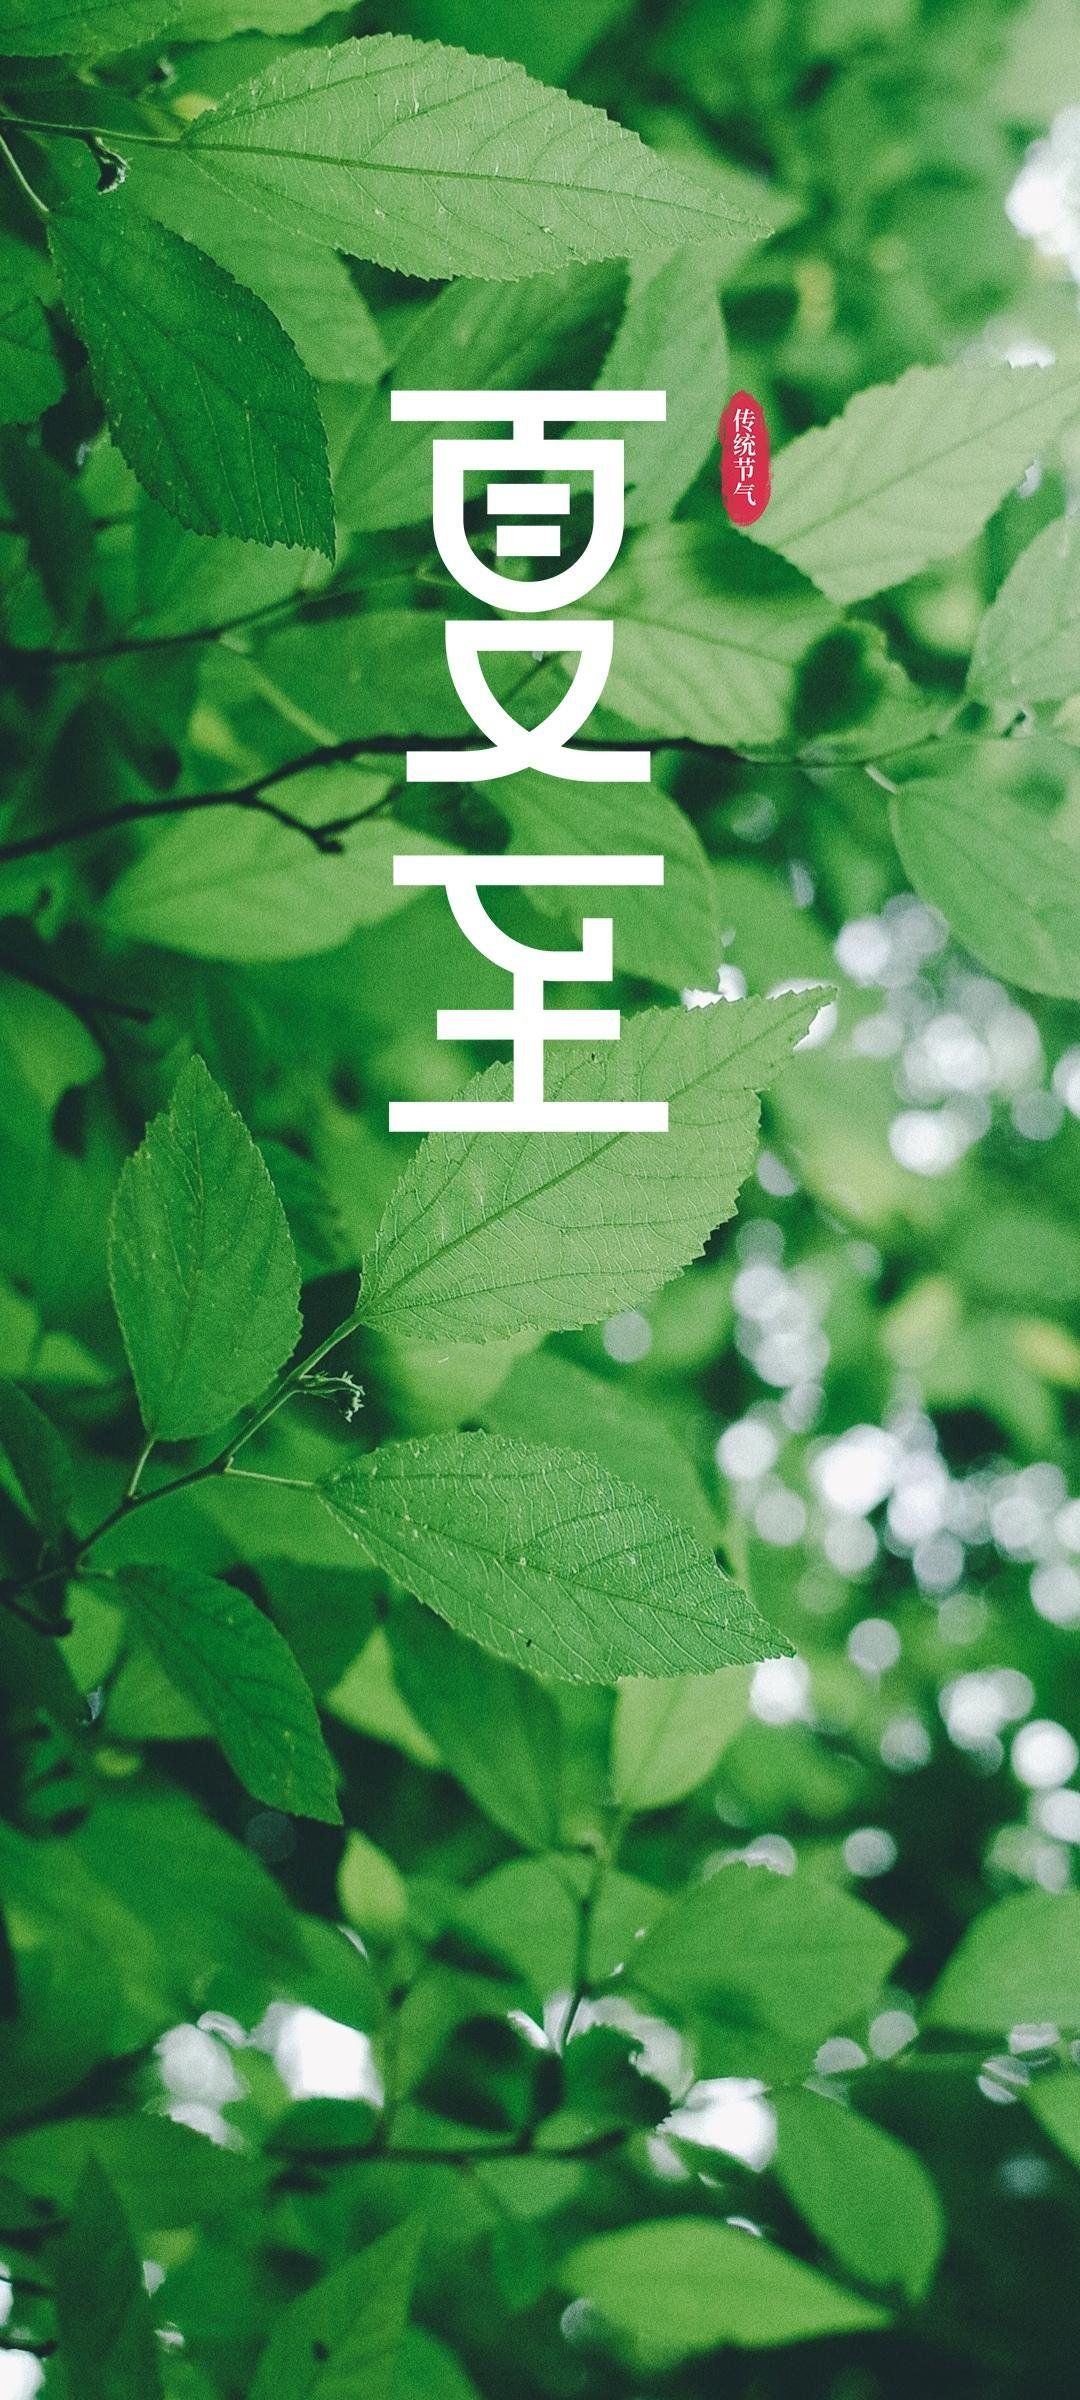 A green plant background with the text '愚人节' in white. - 1080x2400, Japanese, leaves